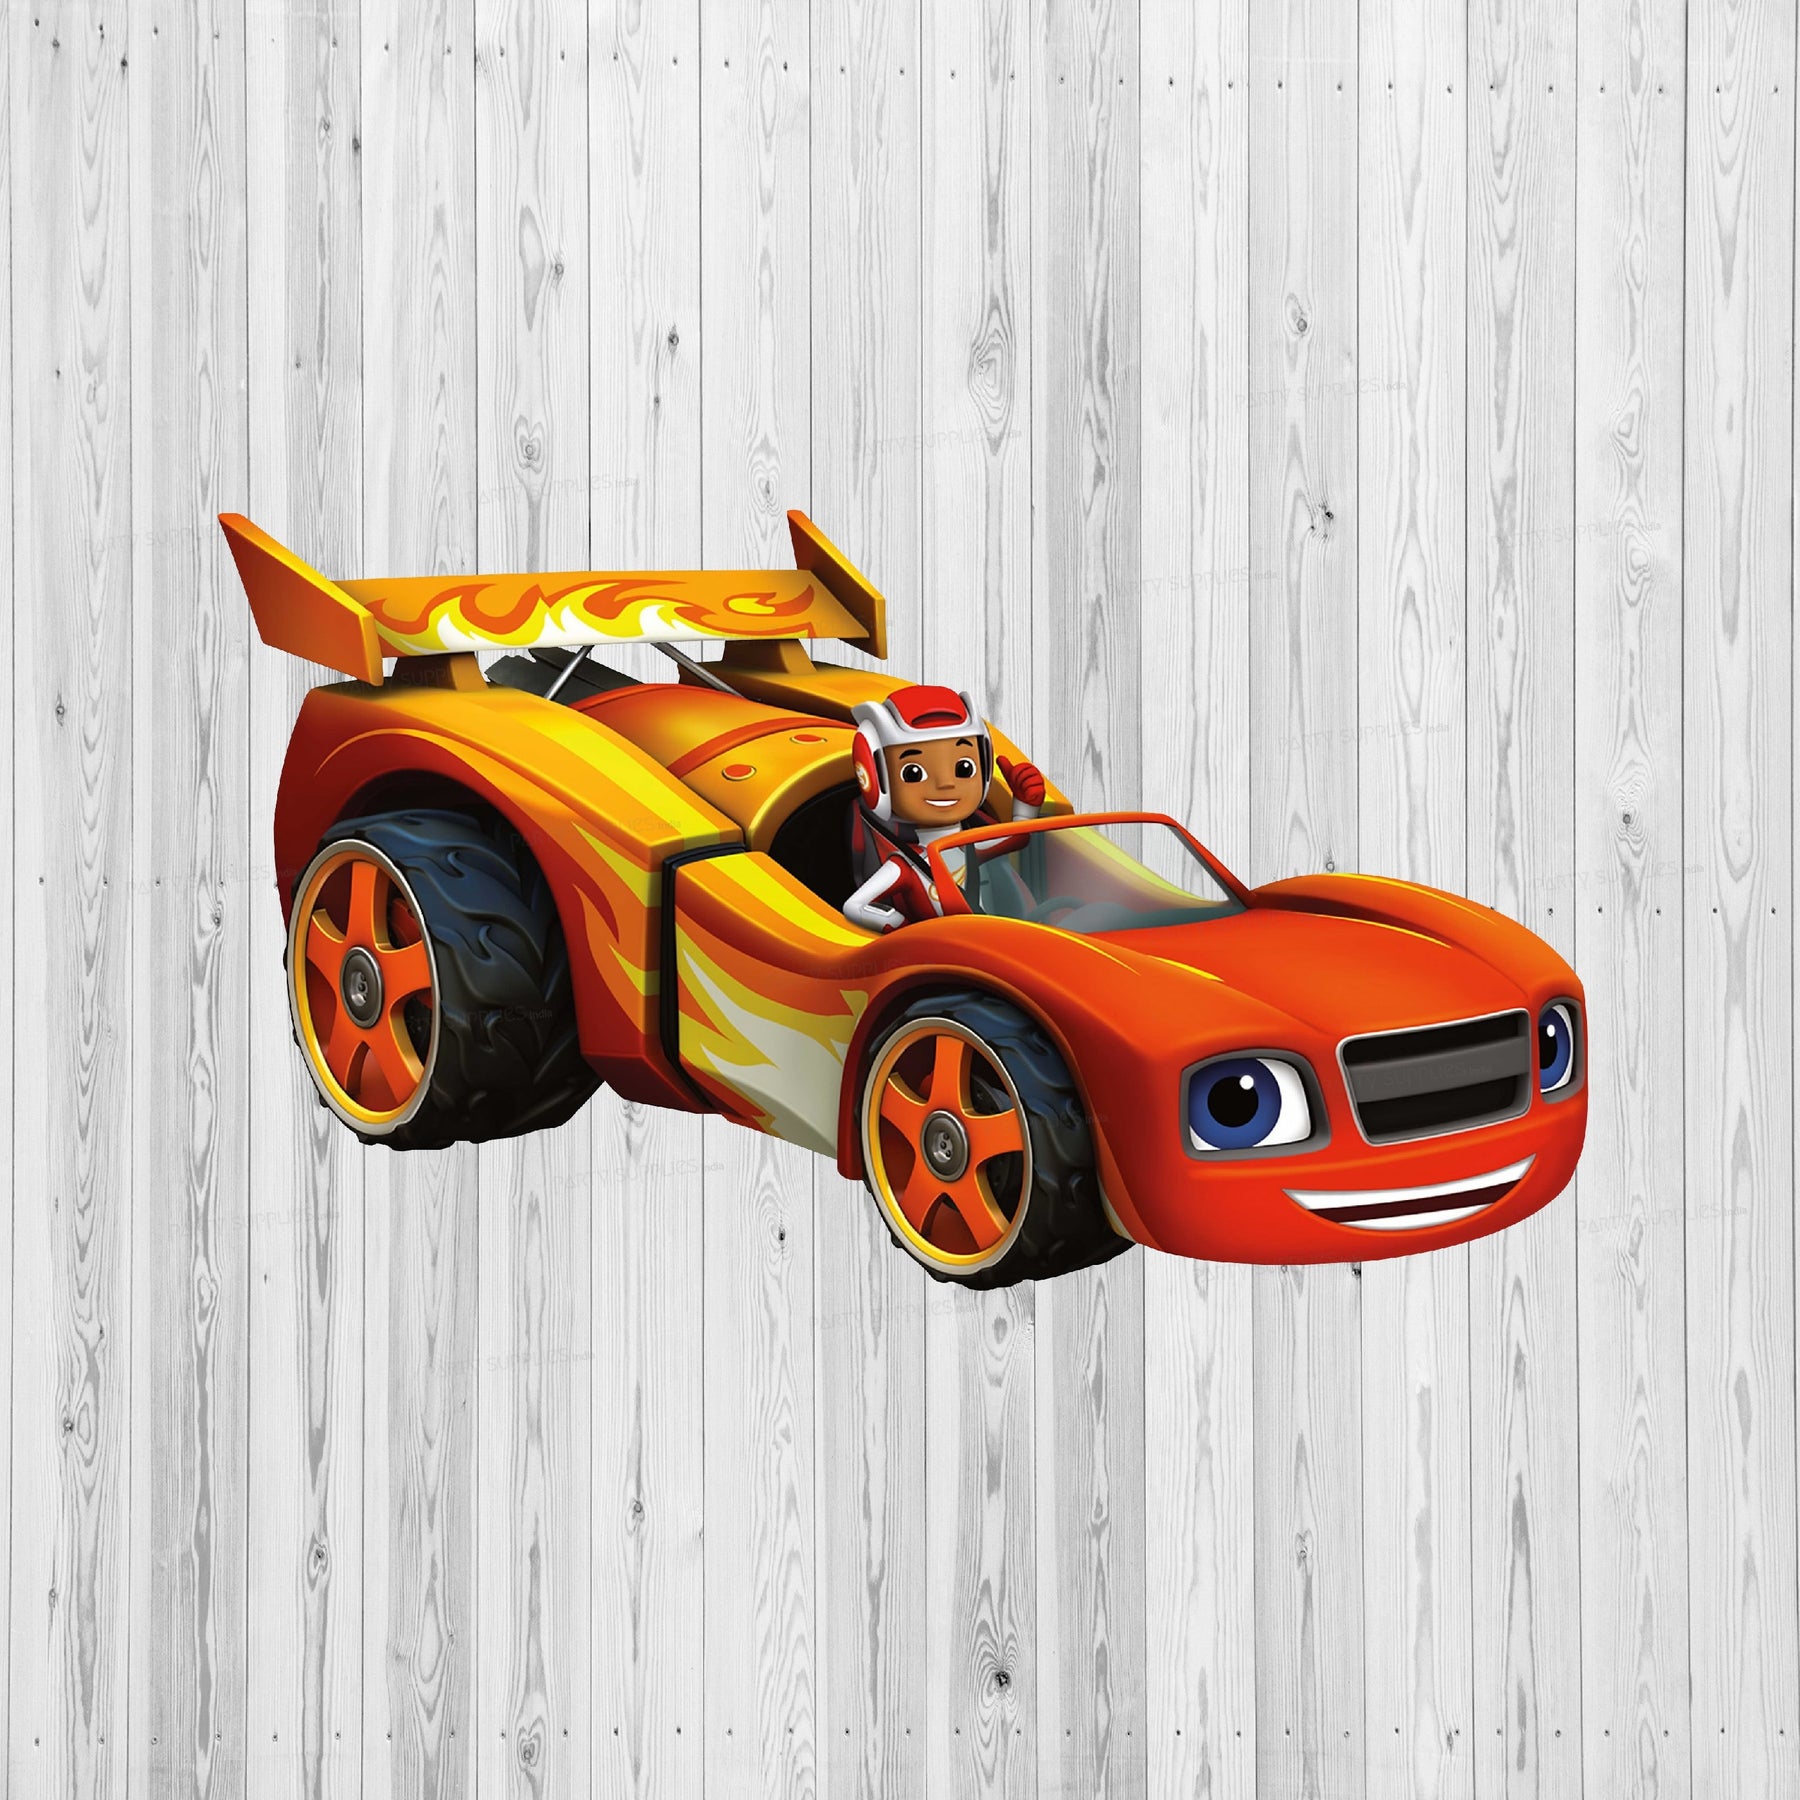 PSI Blaze and the Monster Machines Theme Cutout - 03